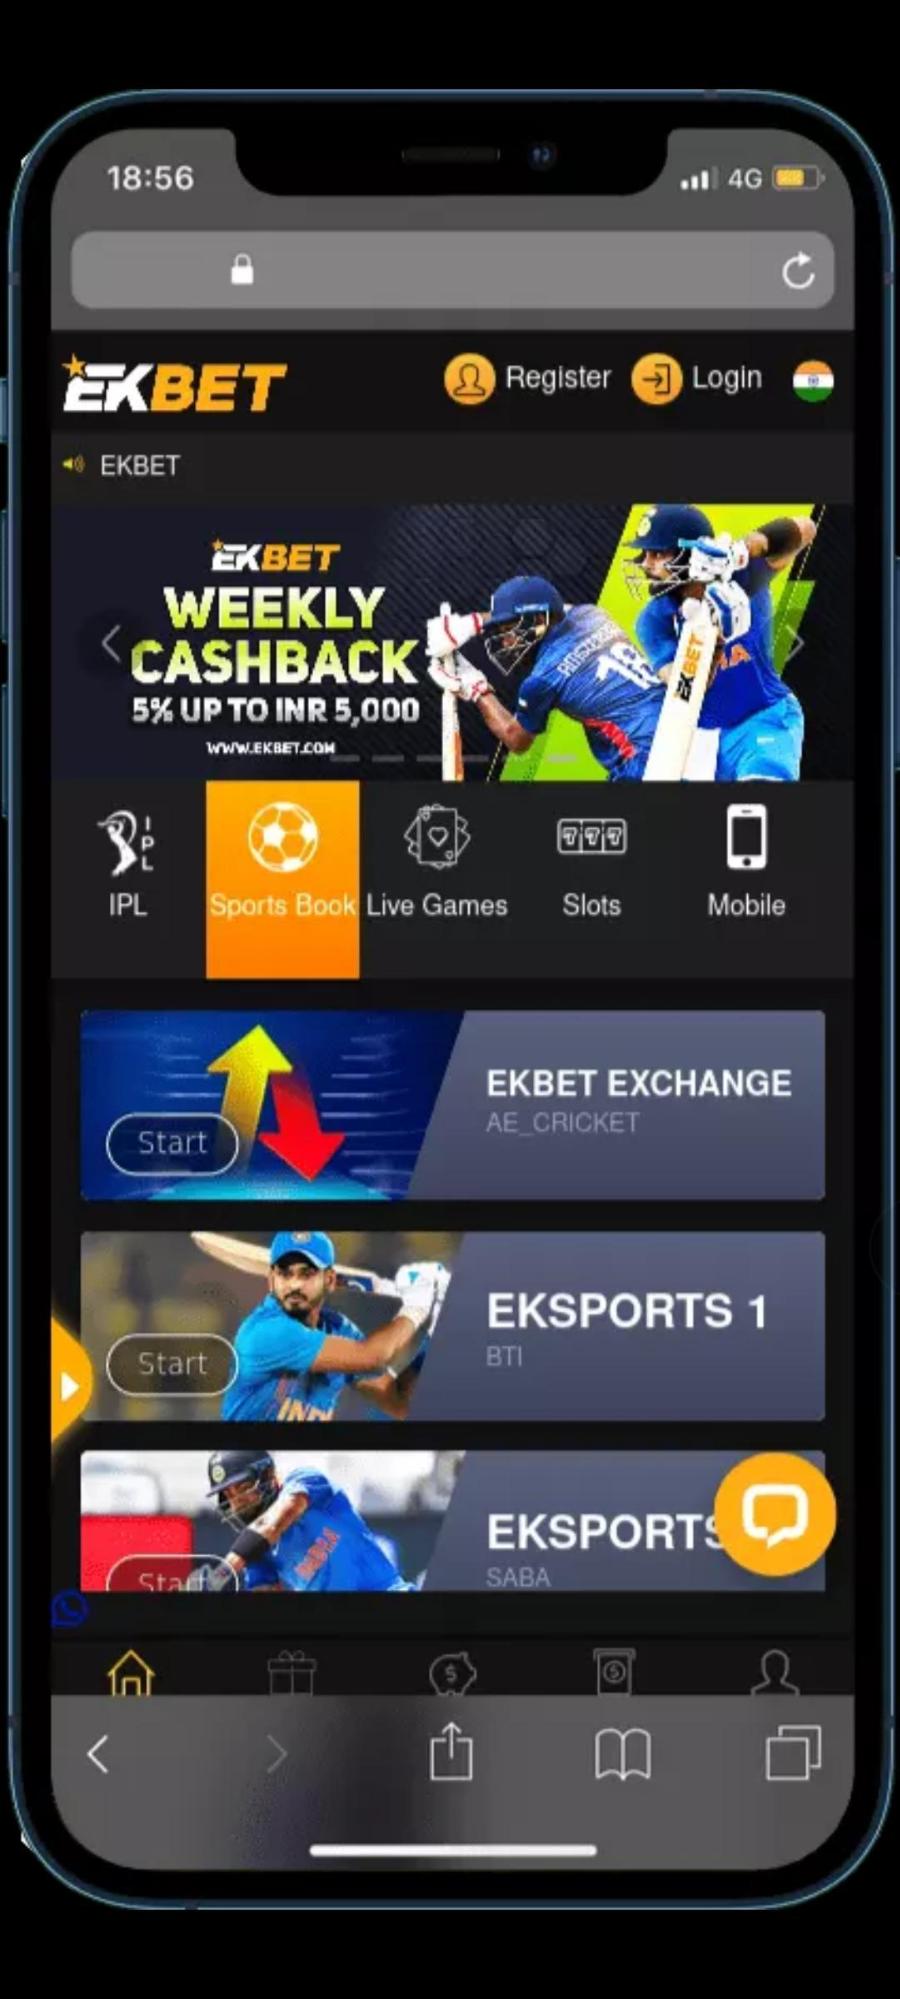 Which betting items are available through Ekbet's mobile websites 